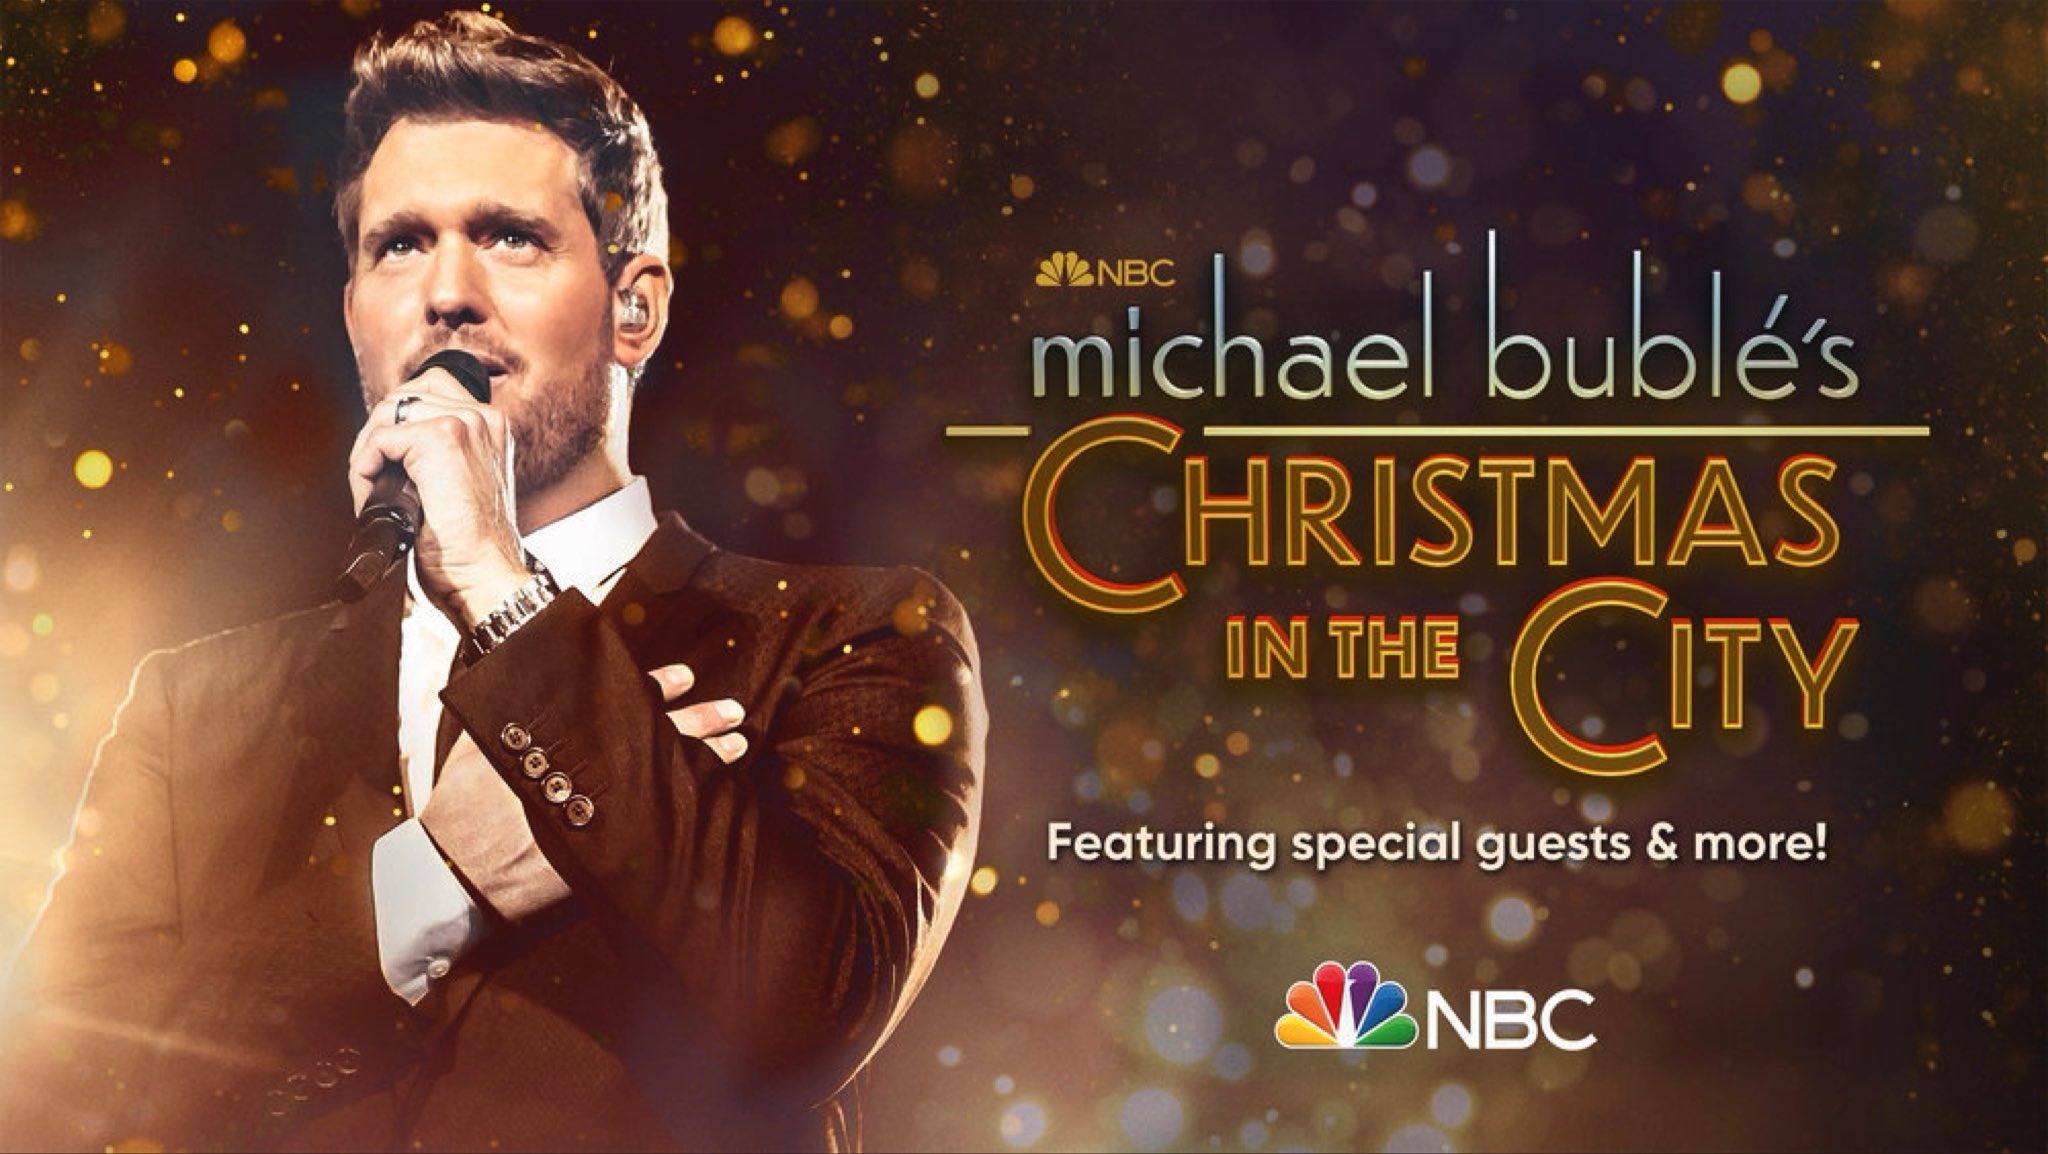 Mega Sized TV Poster Image for Michael Buble's Christmas in the City 